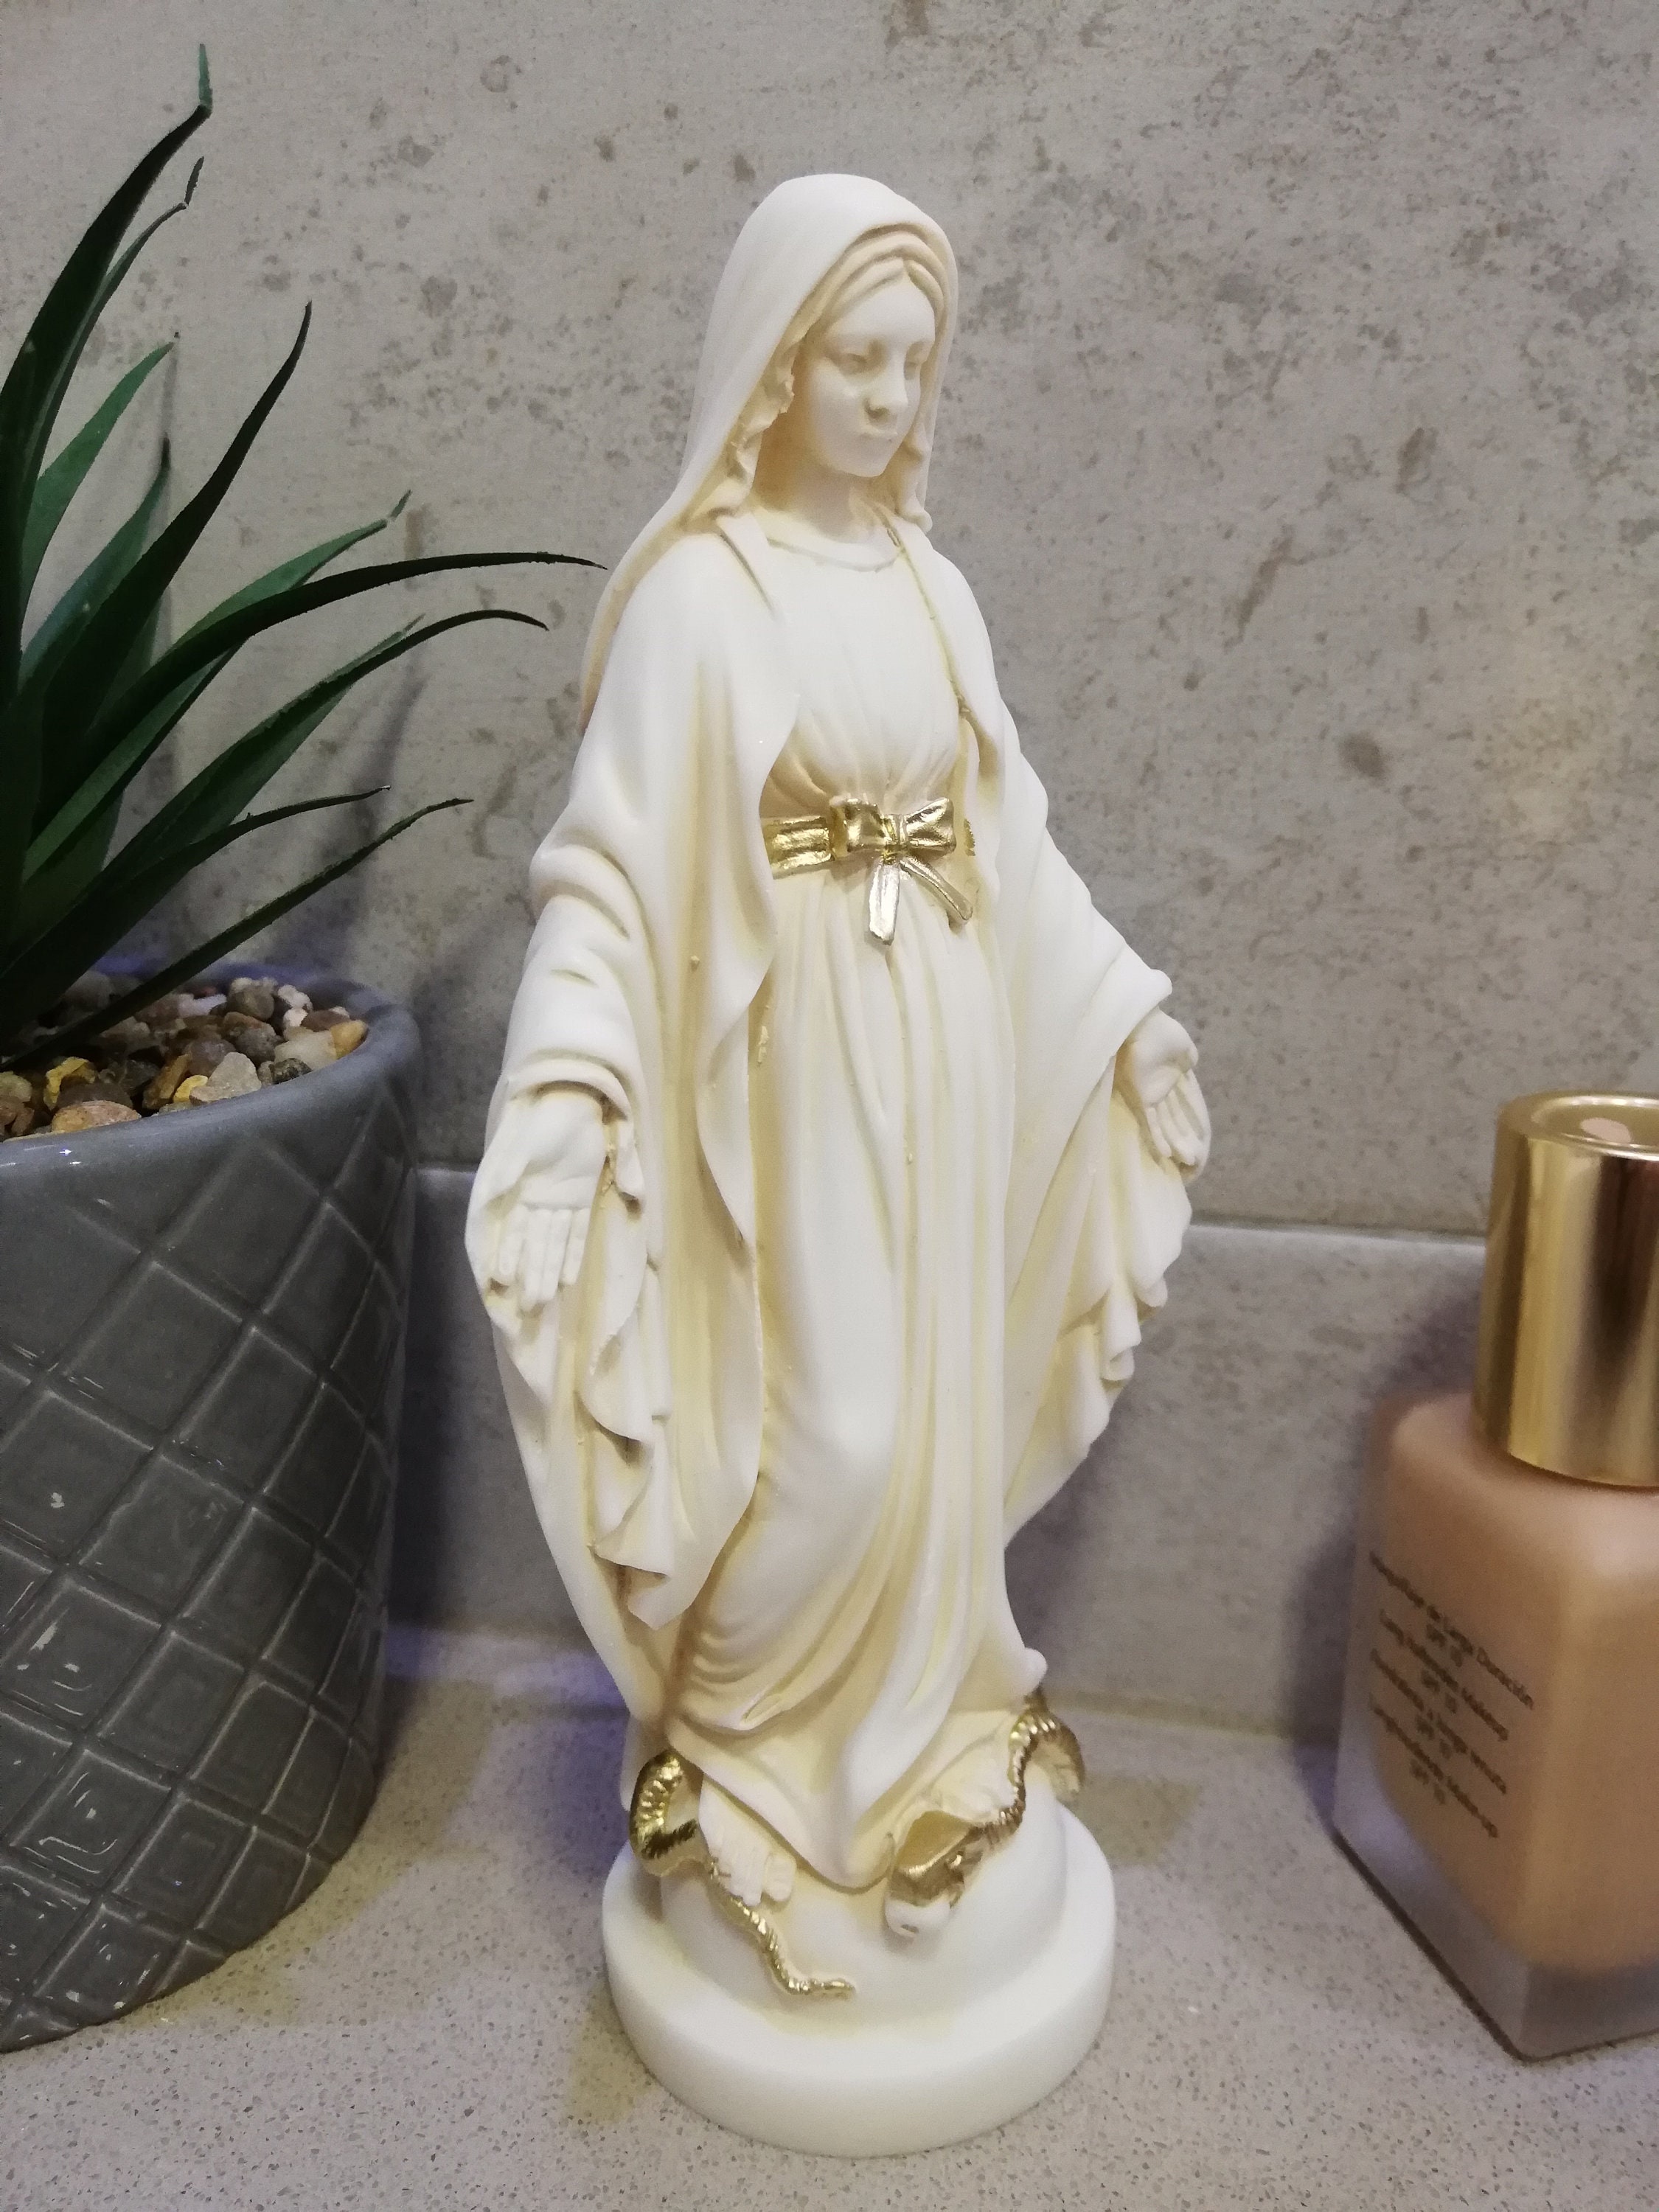 Virgin Mary madonna Religious Statues 17.5cm-6.89in - Etsy